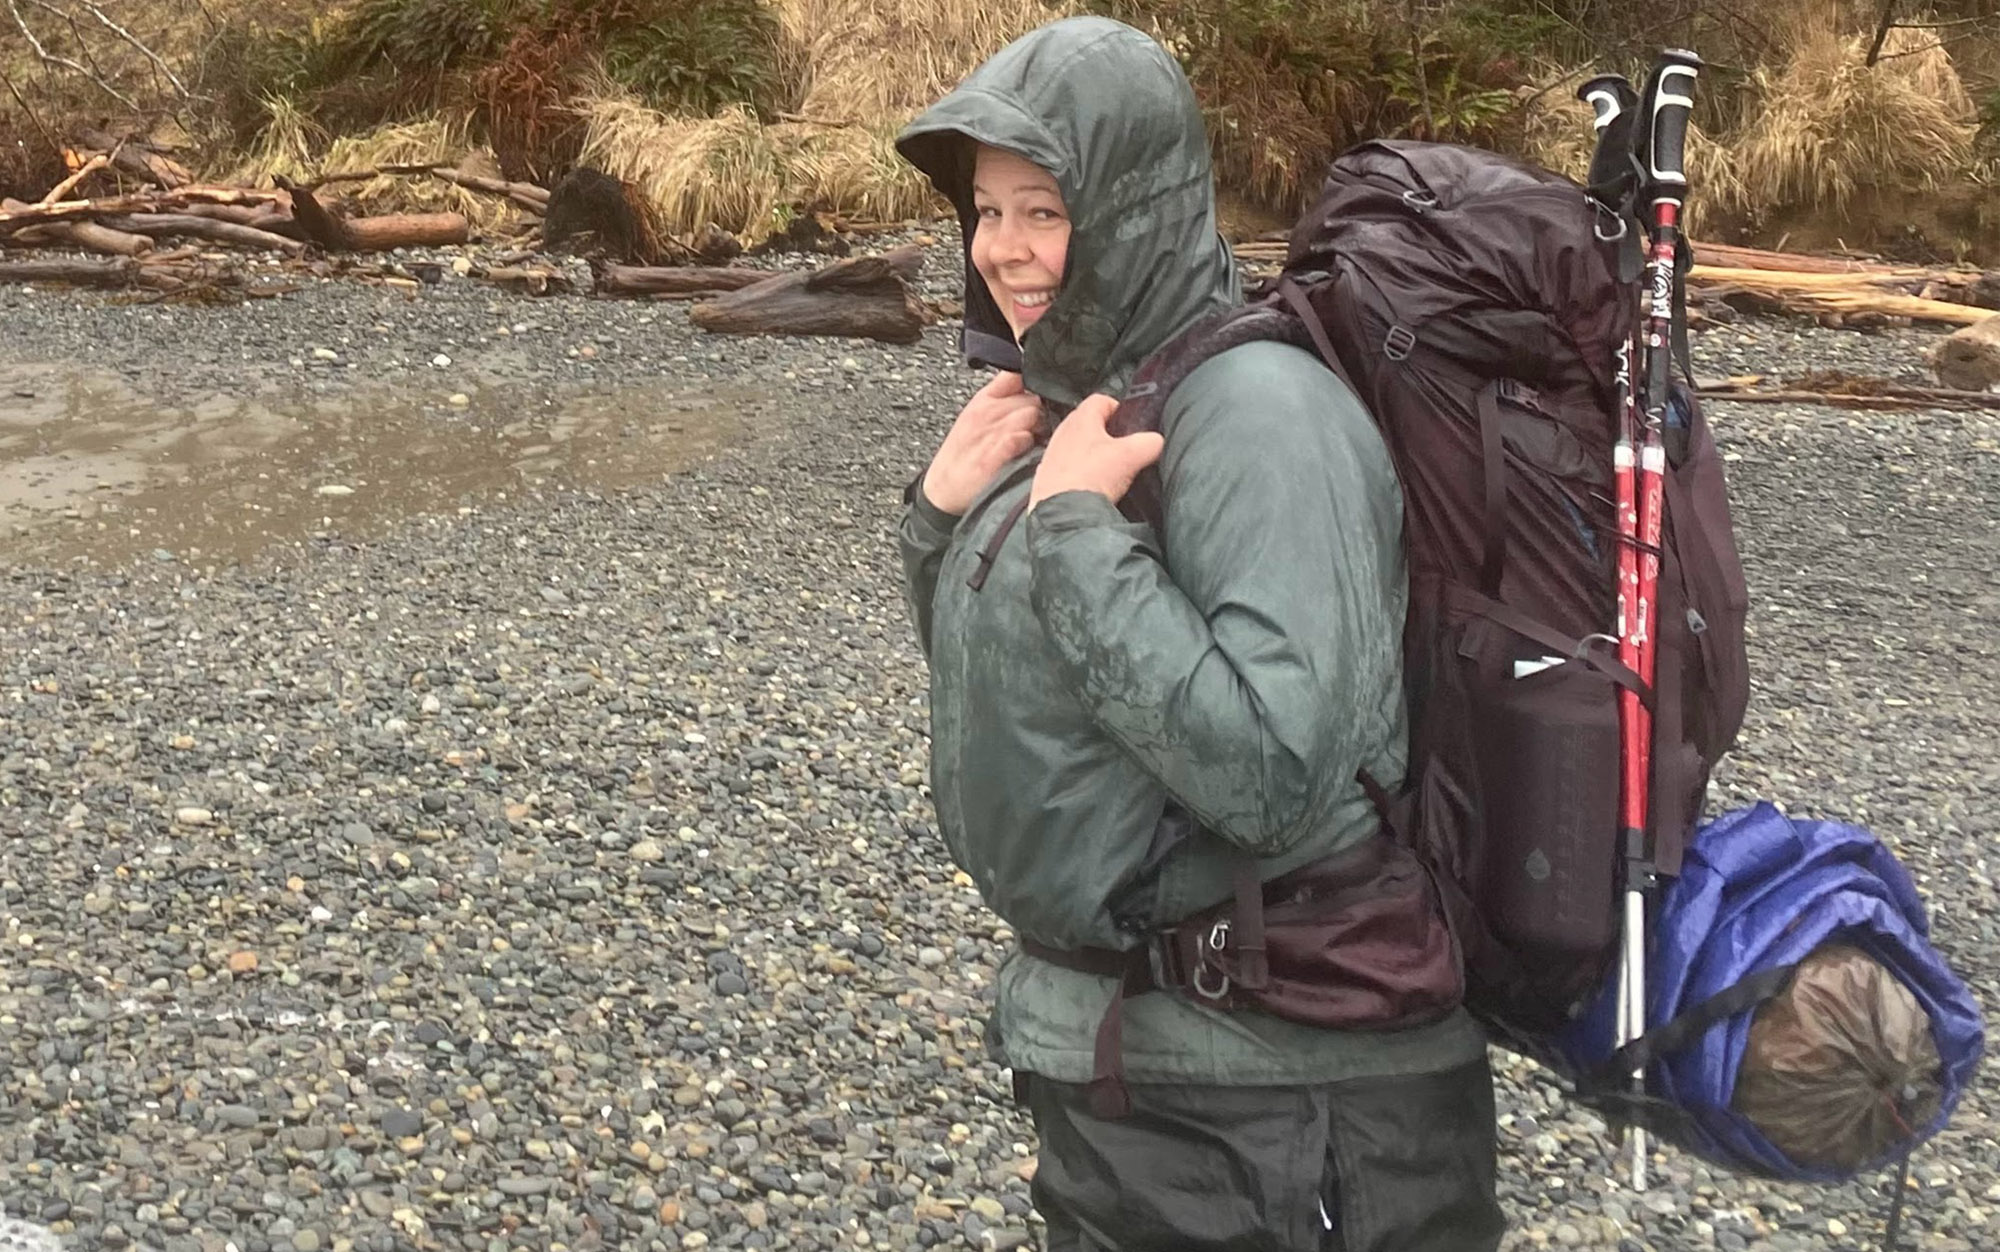 Diana reported that the hip belt pockets were easy to access on her winter overnight along the Olympic coast.